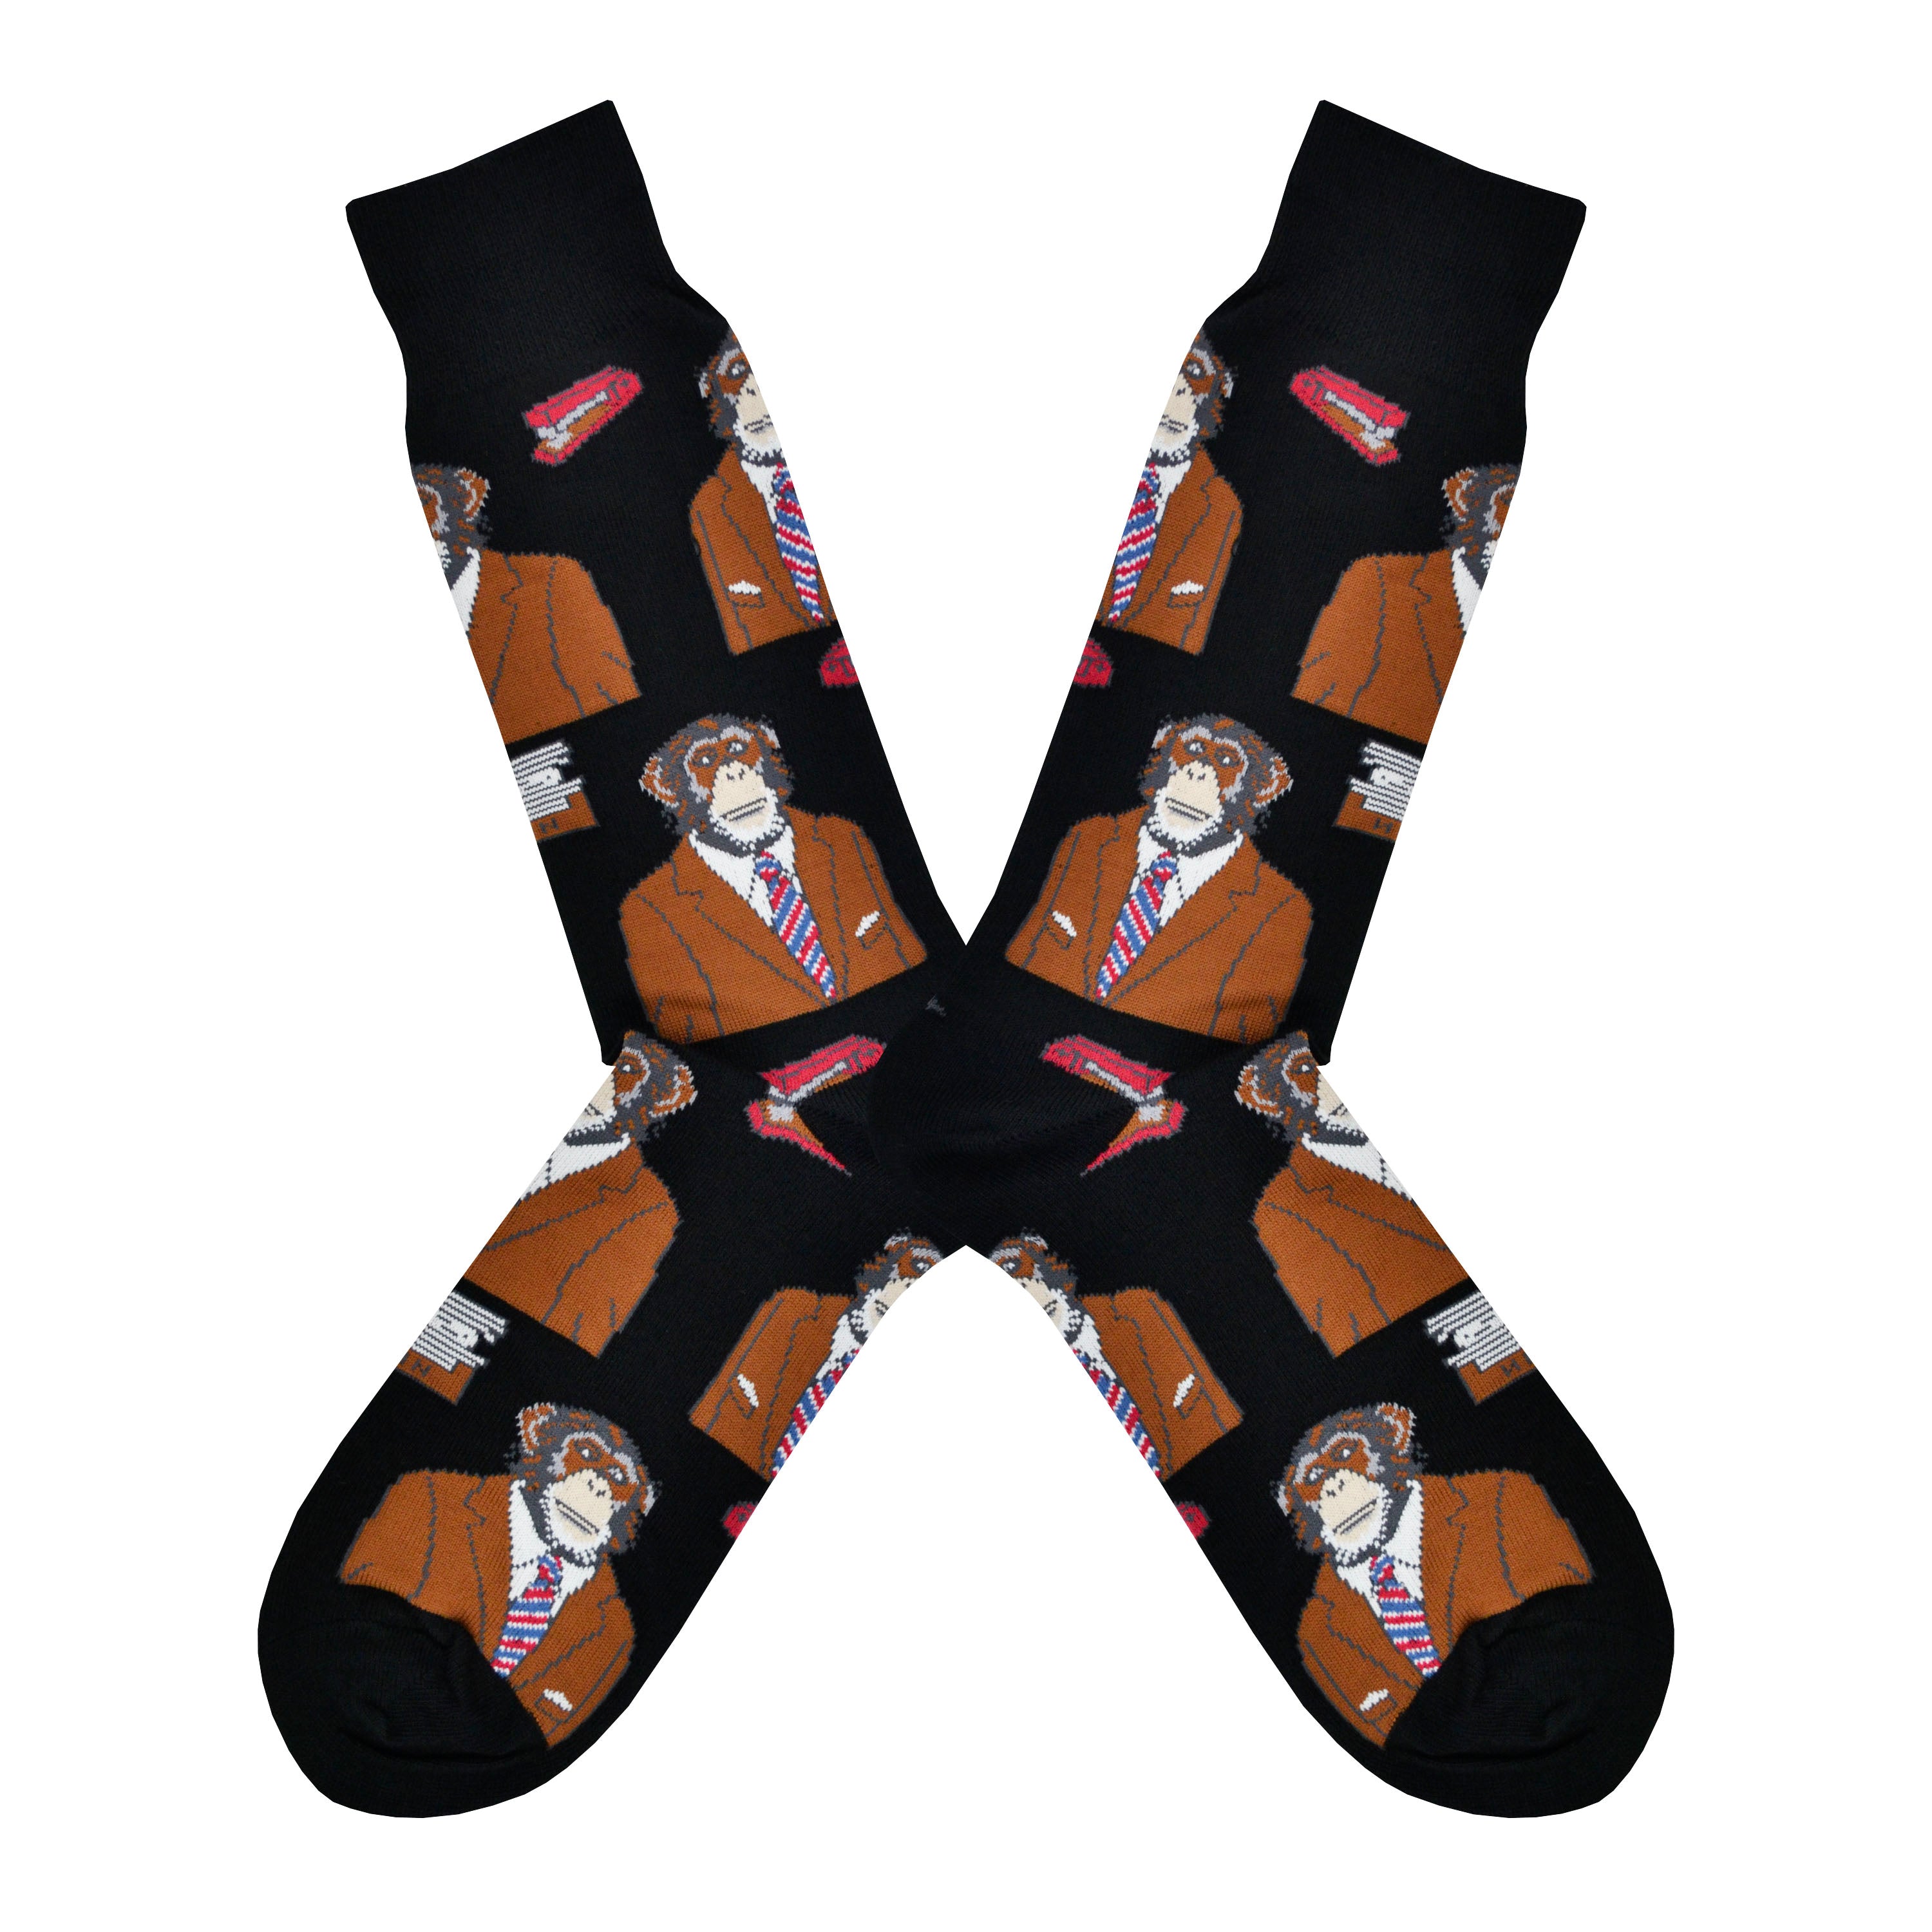 Shown in a flatlay, a pair of Socksmith men's black cotton crew socks with black cuff/heel/toe featuring an all over design of a monkey in a suit and tie.